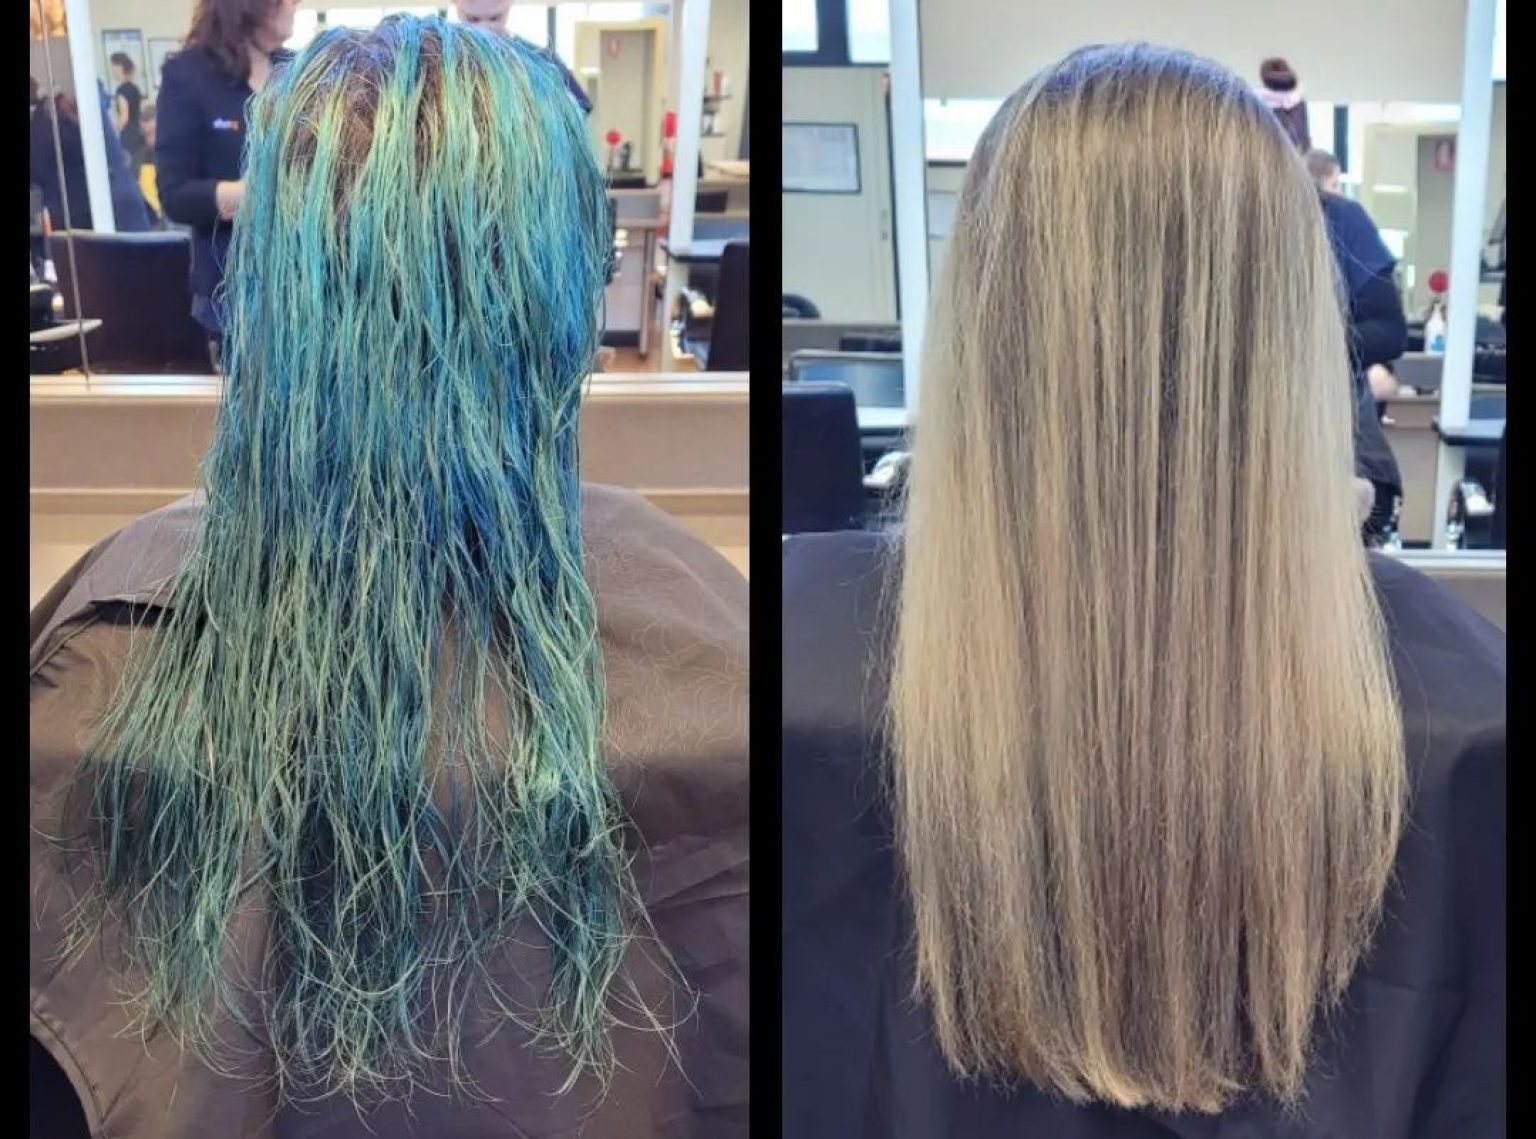 5. How to Remove Blue Hair Dye - wide 6